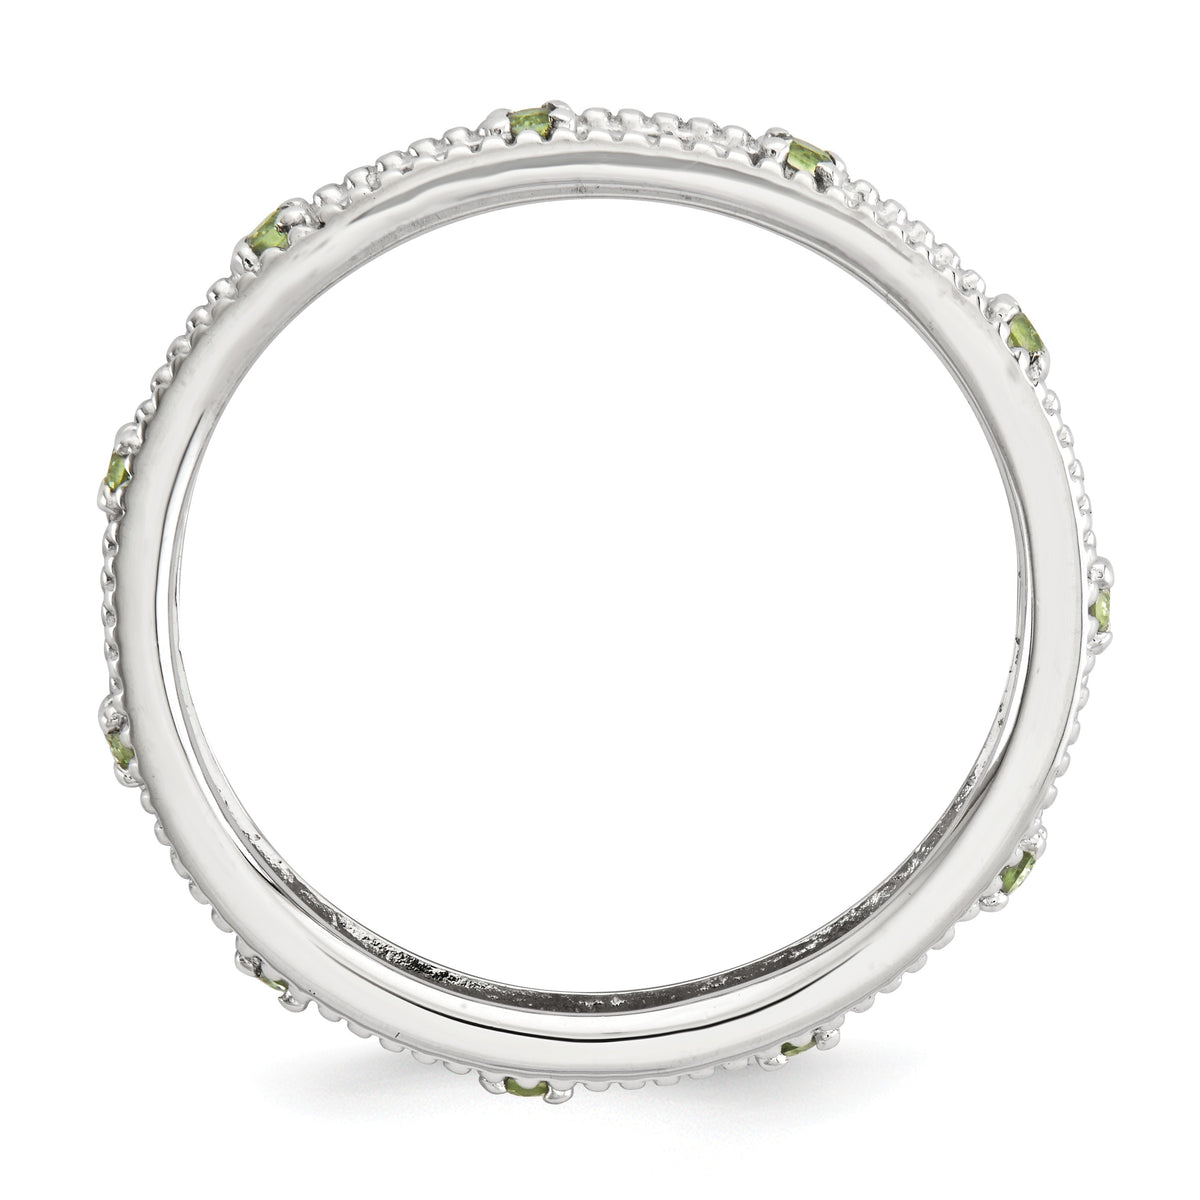 Alternate view of the 3mm Sterling Silver Stackable Expressions Peridot Scroll Band by The Black Bow Jewelry Co.